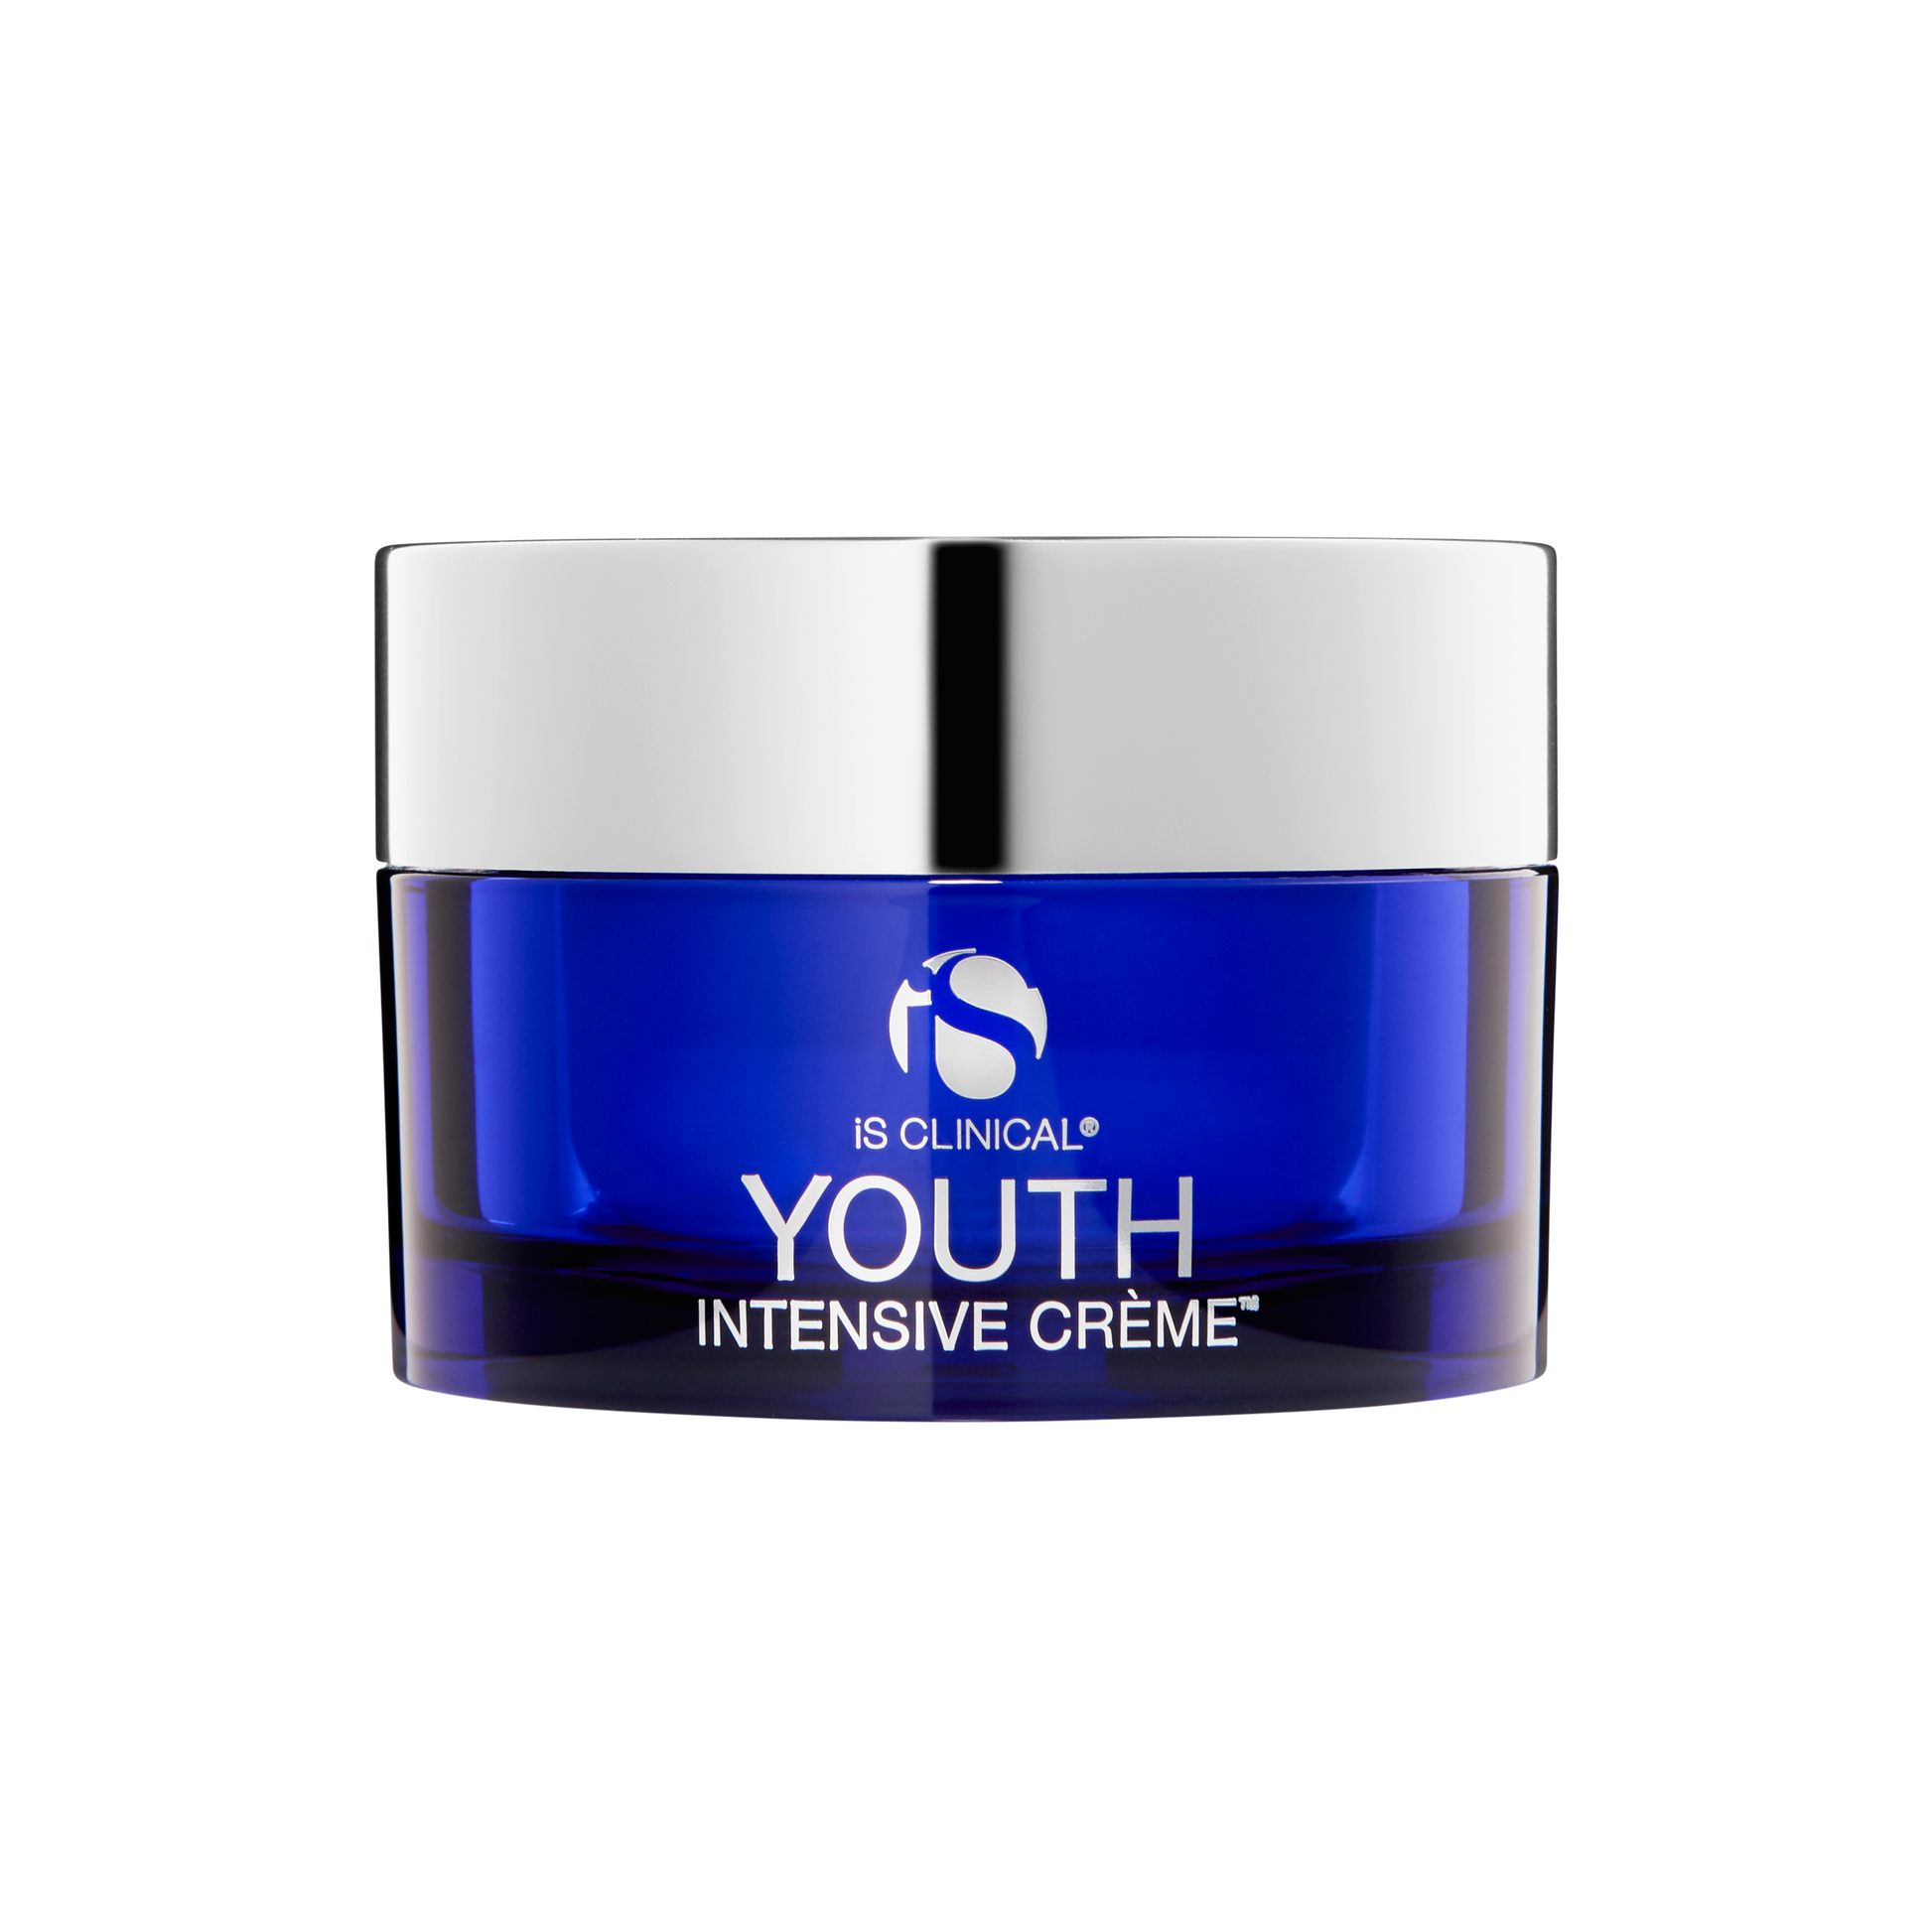 iS Clinical Youth Intensive Creme - Revita Skin Clinic